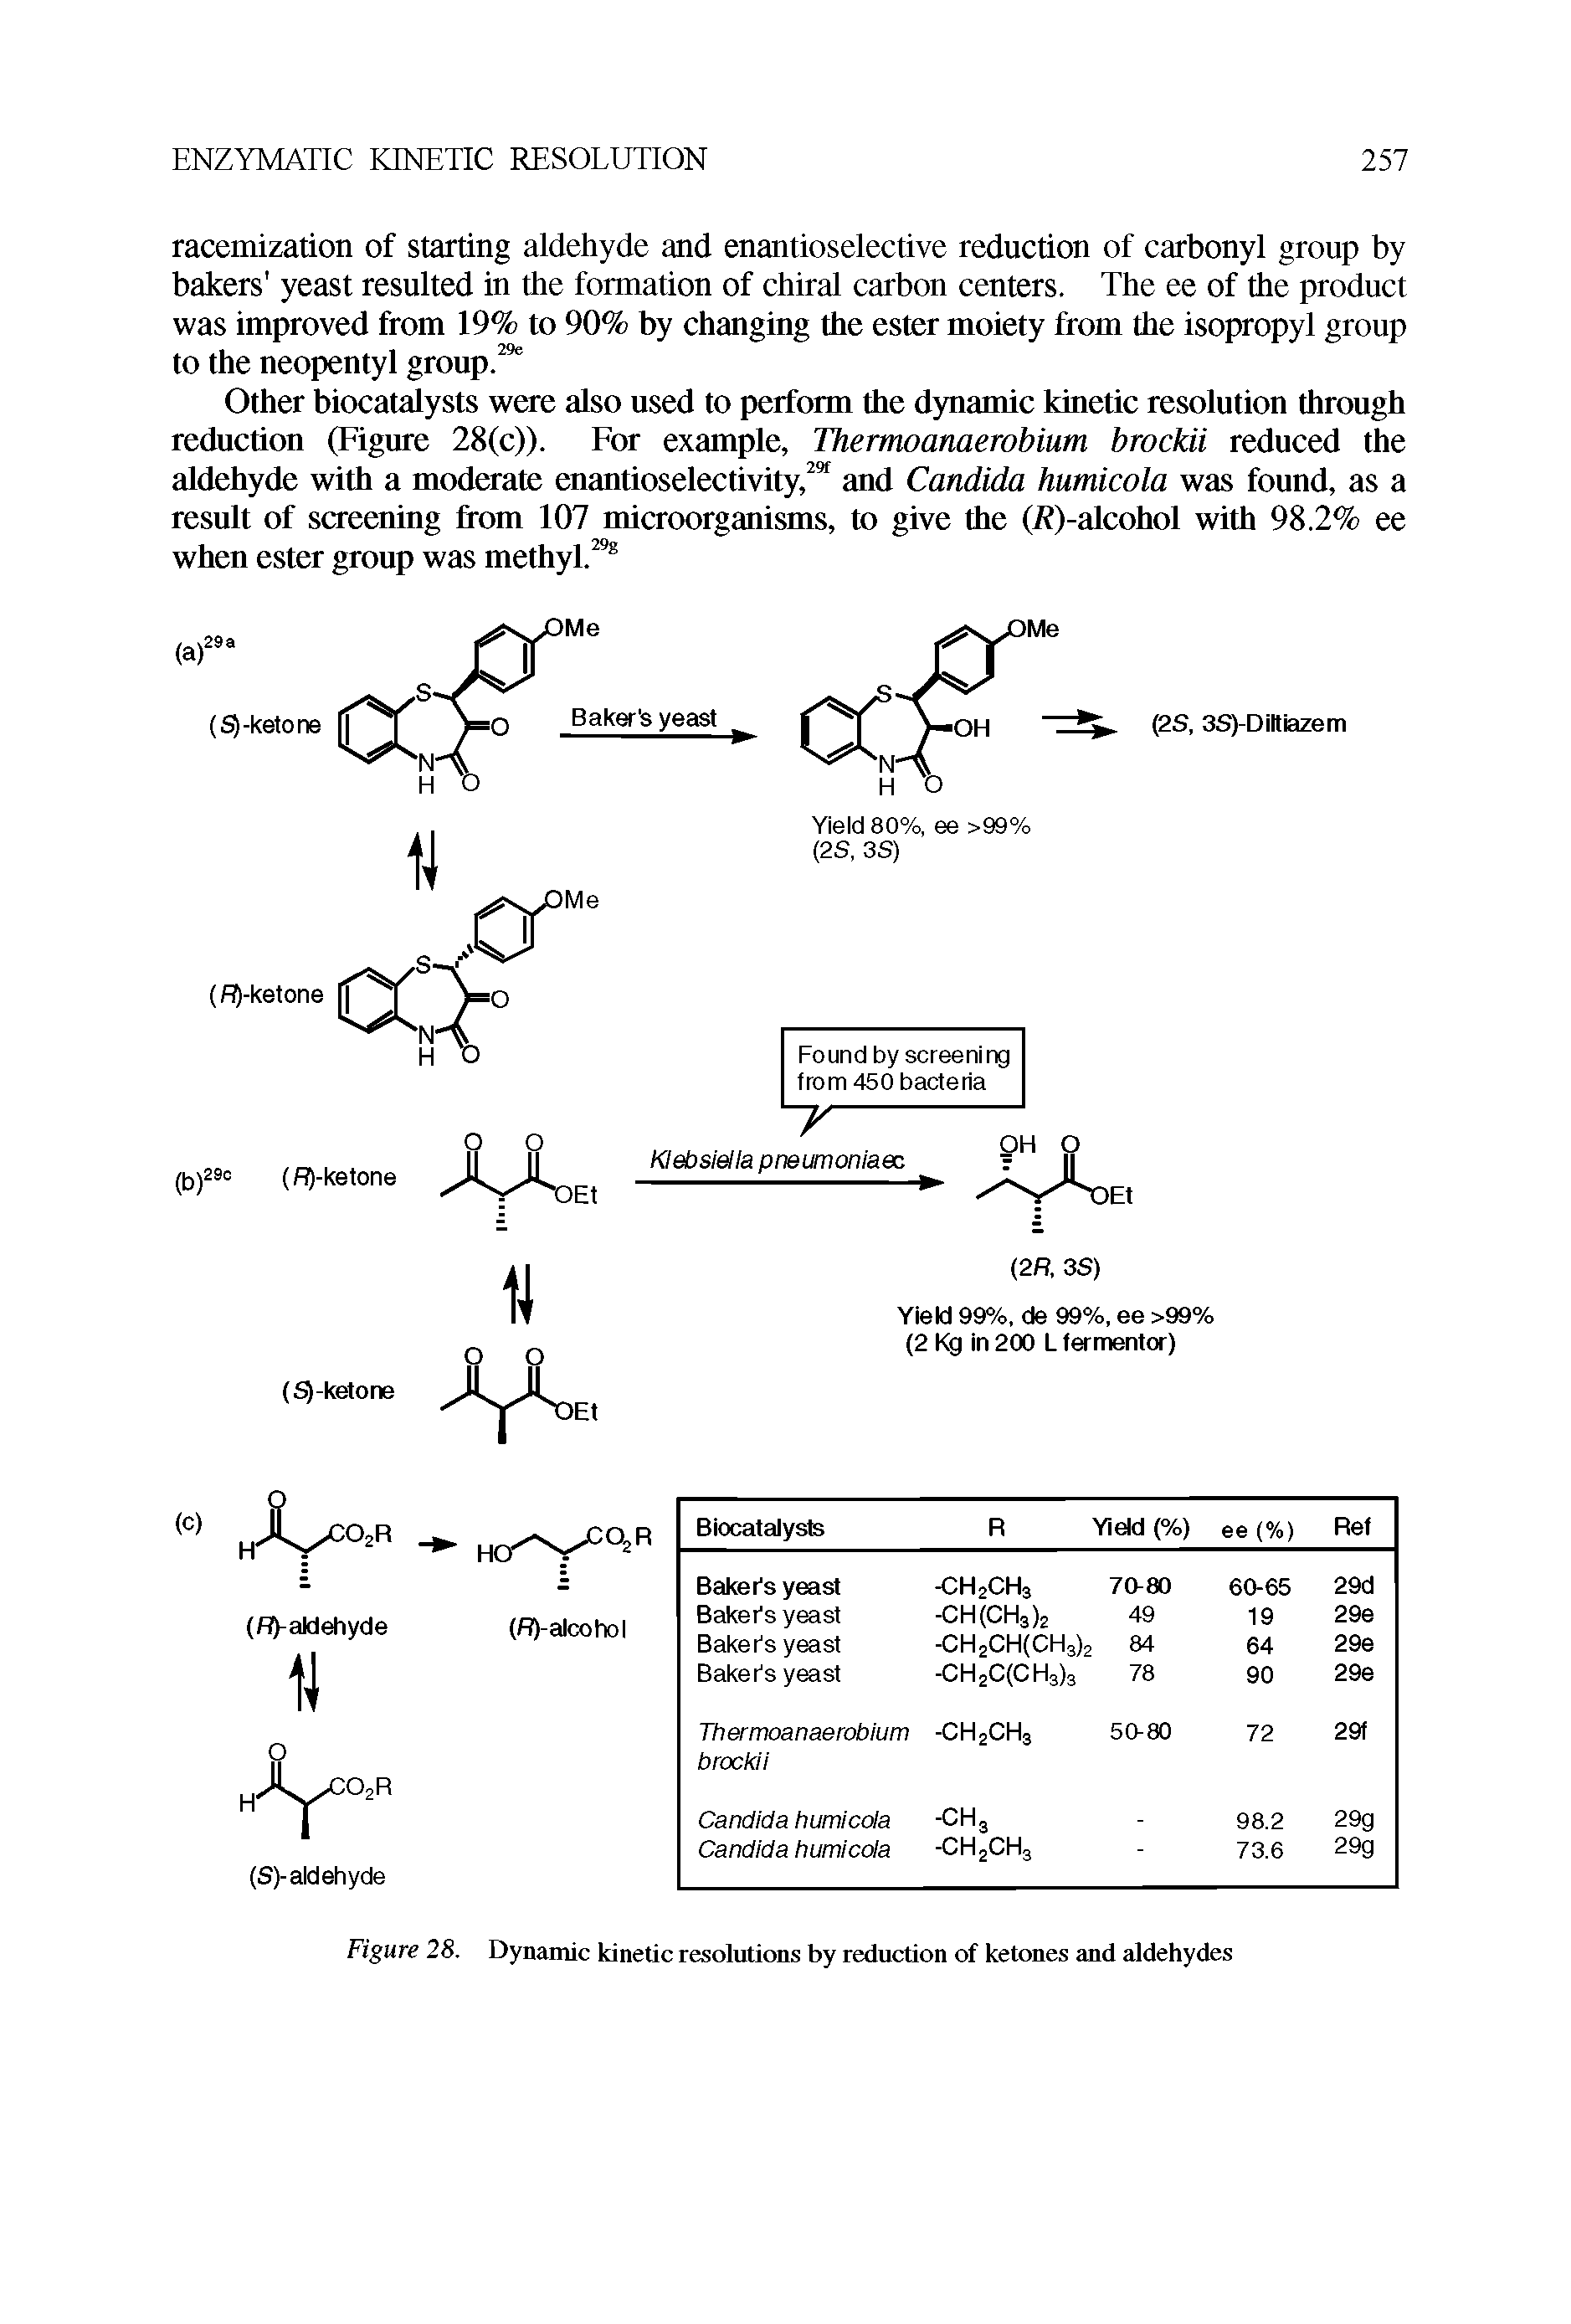 Figure 28. Dynamic kinetic resolutions by reduction of ketones and aldehydes...